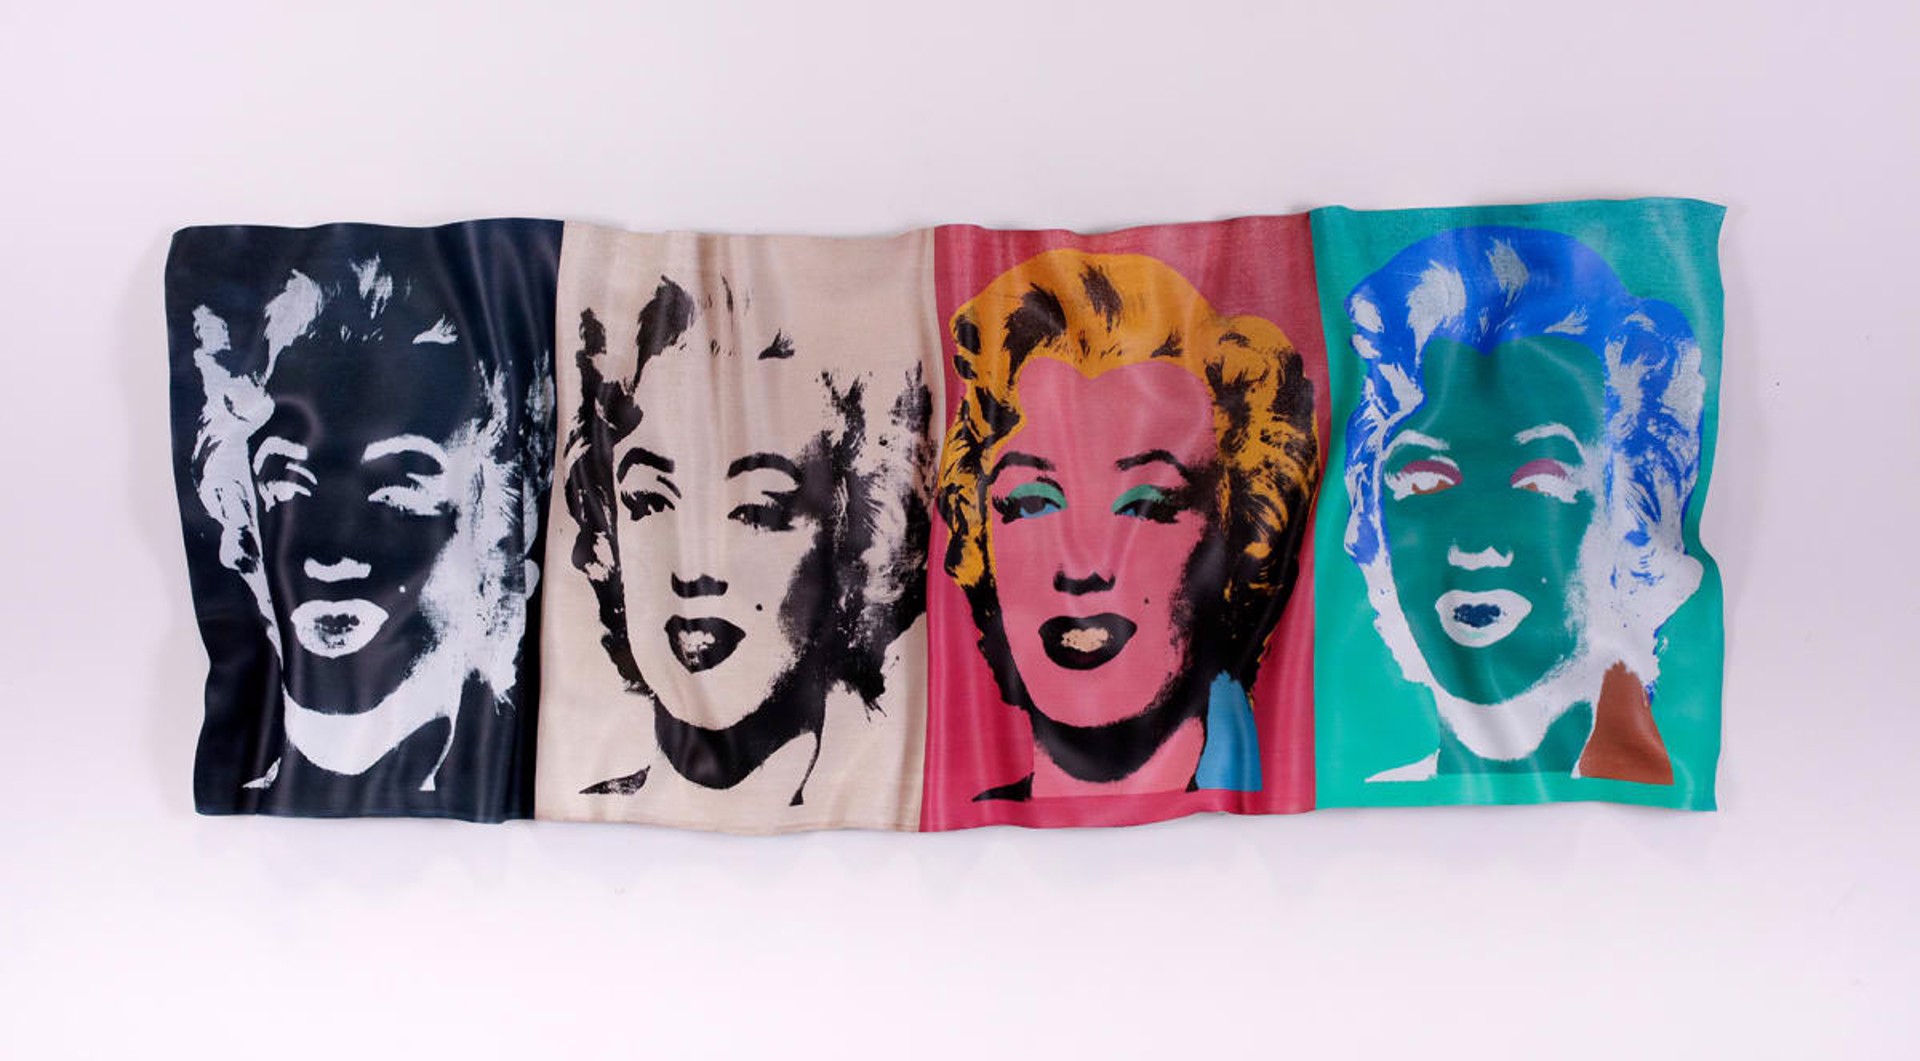 The Four Marilyns of Warhol by Paul Rousso